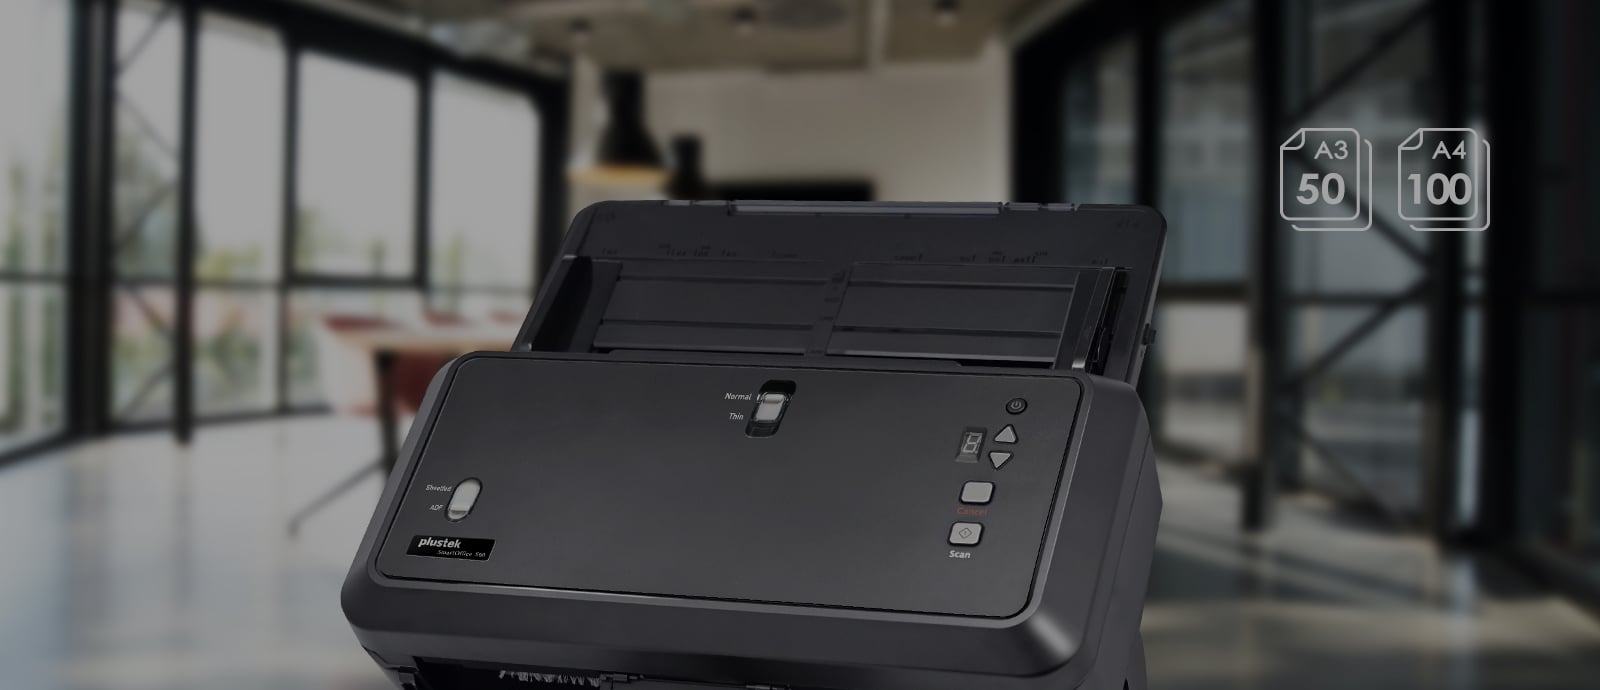 SmartOffice S60-Large Format A3 Document Scanner